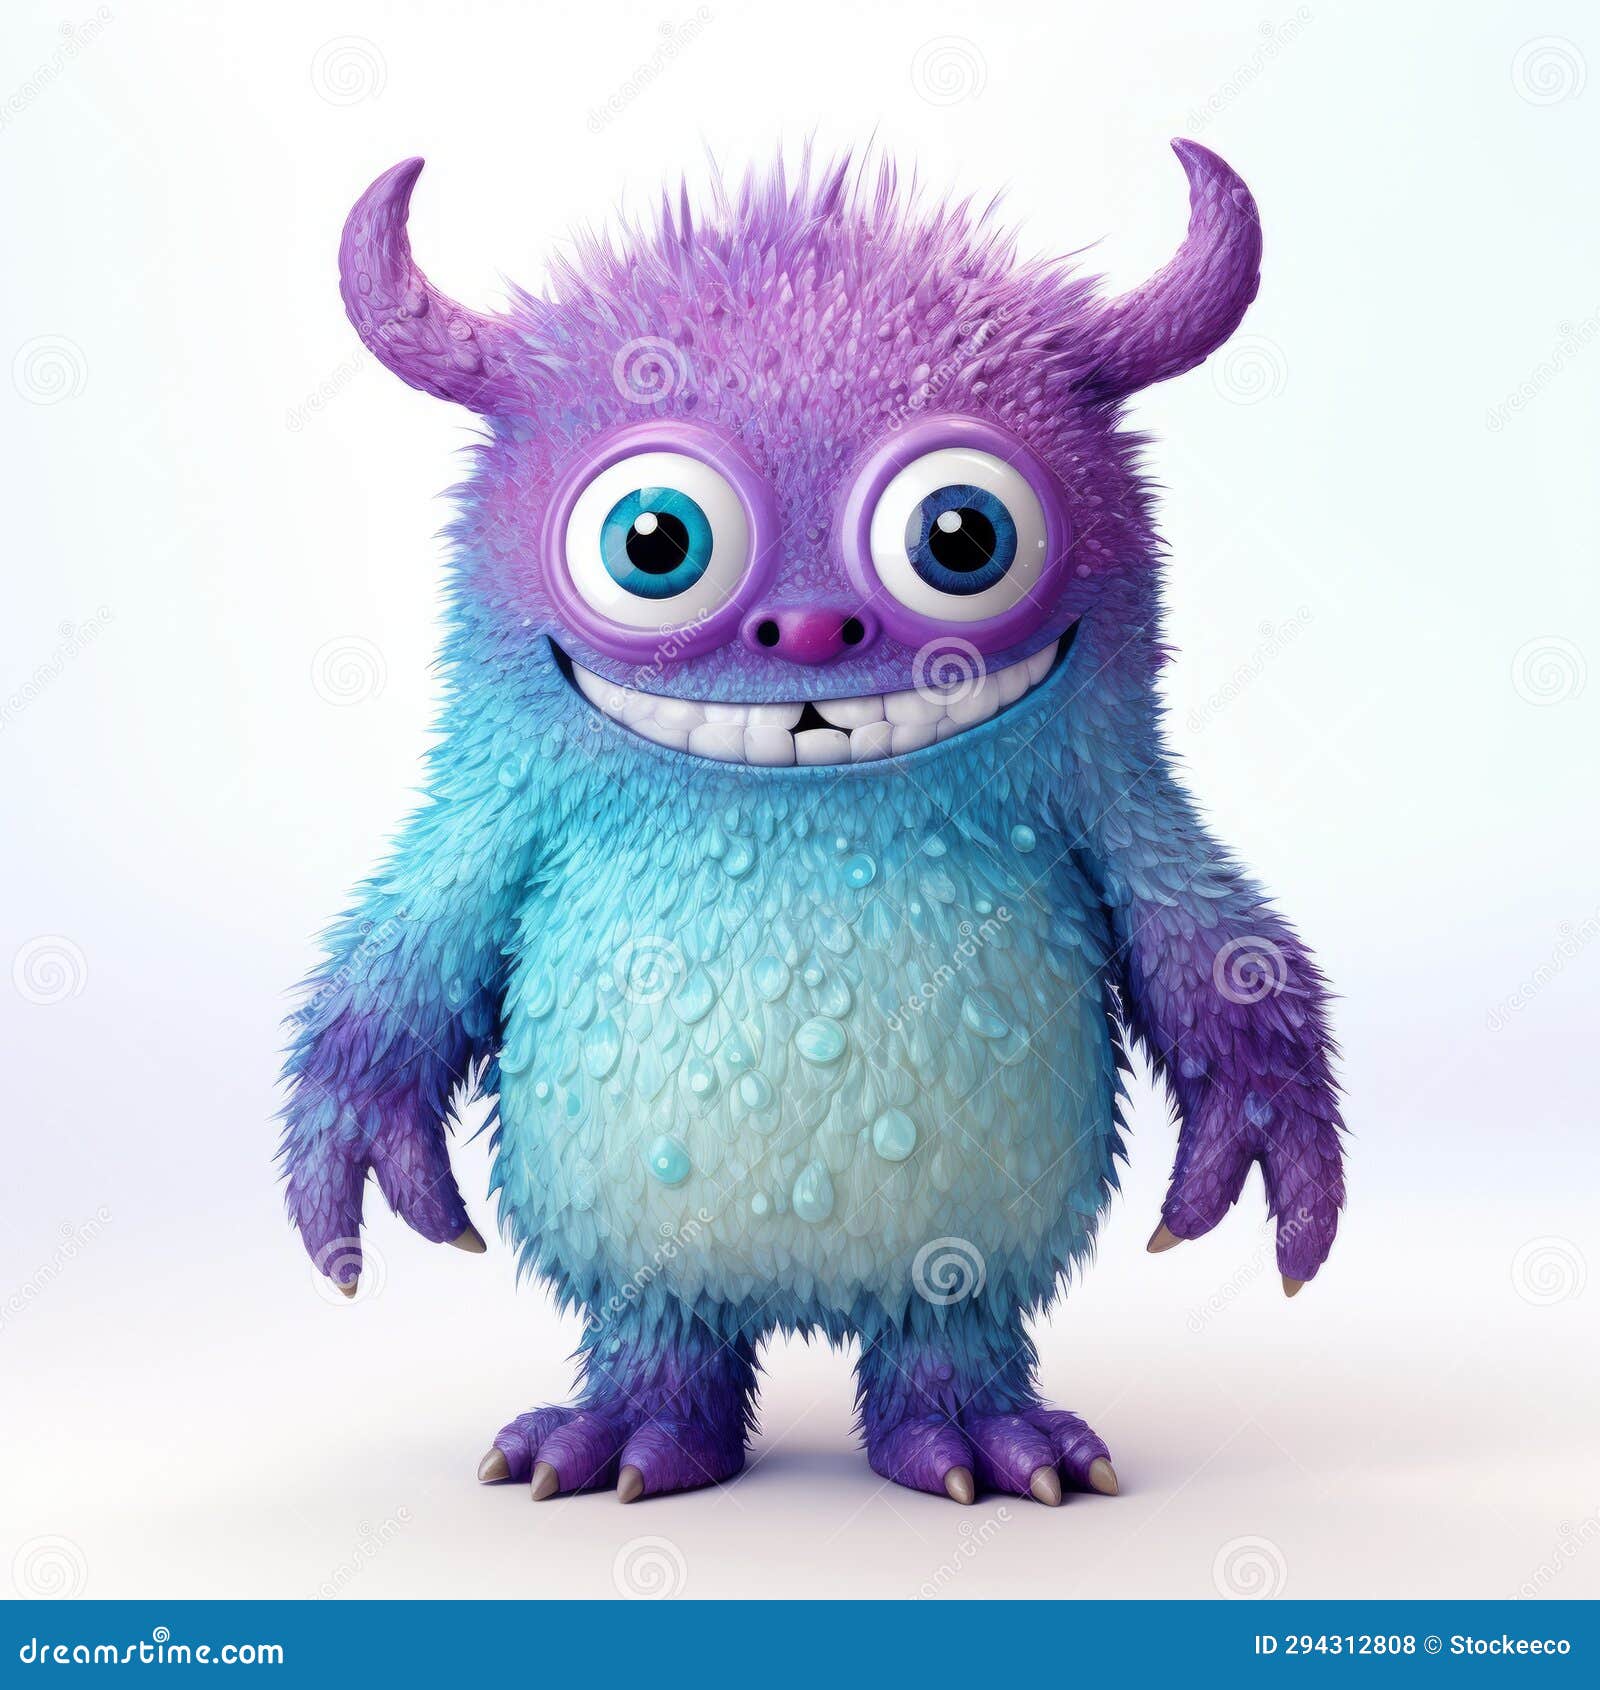 eerily realistic 3d cartoon monster with glittery purple eyes